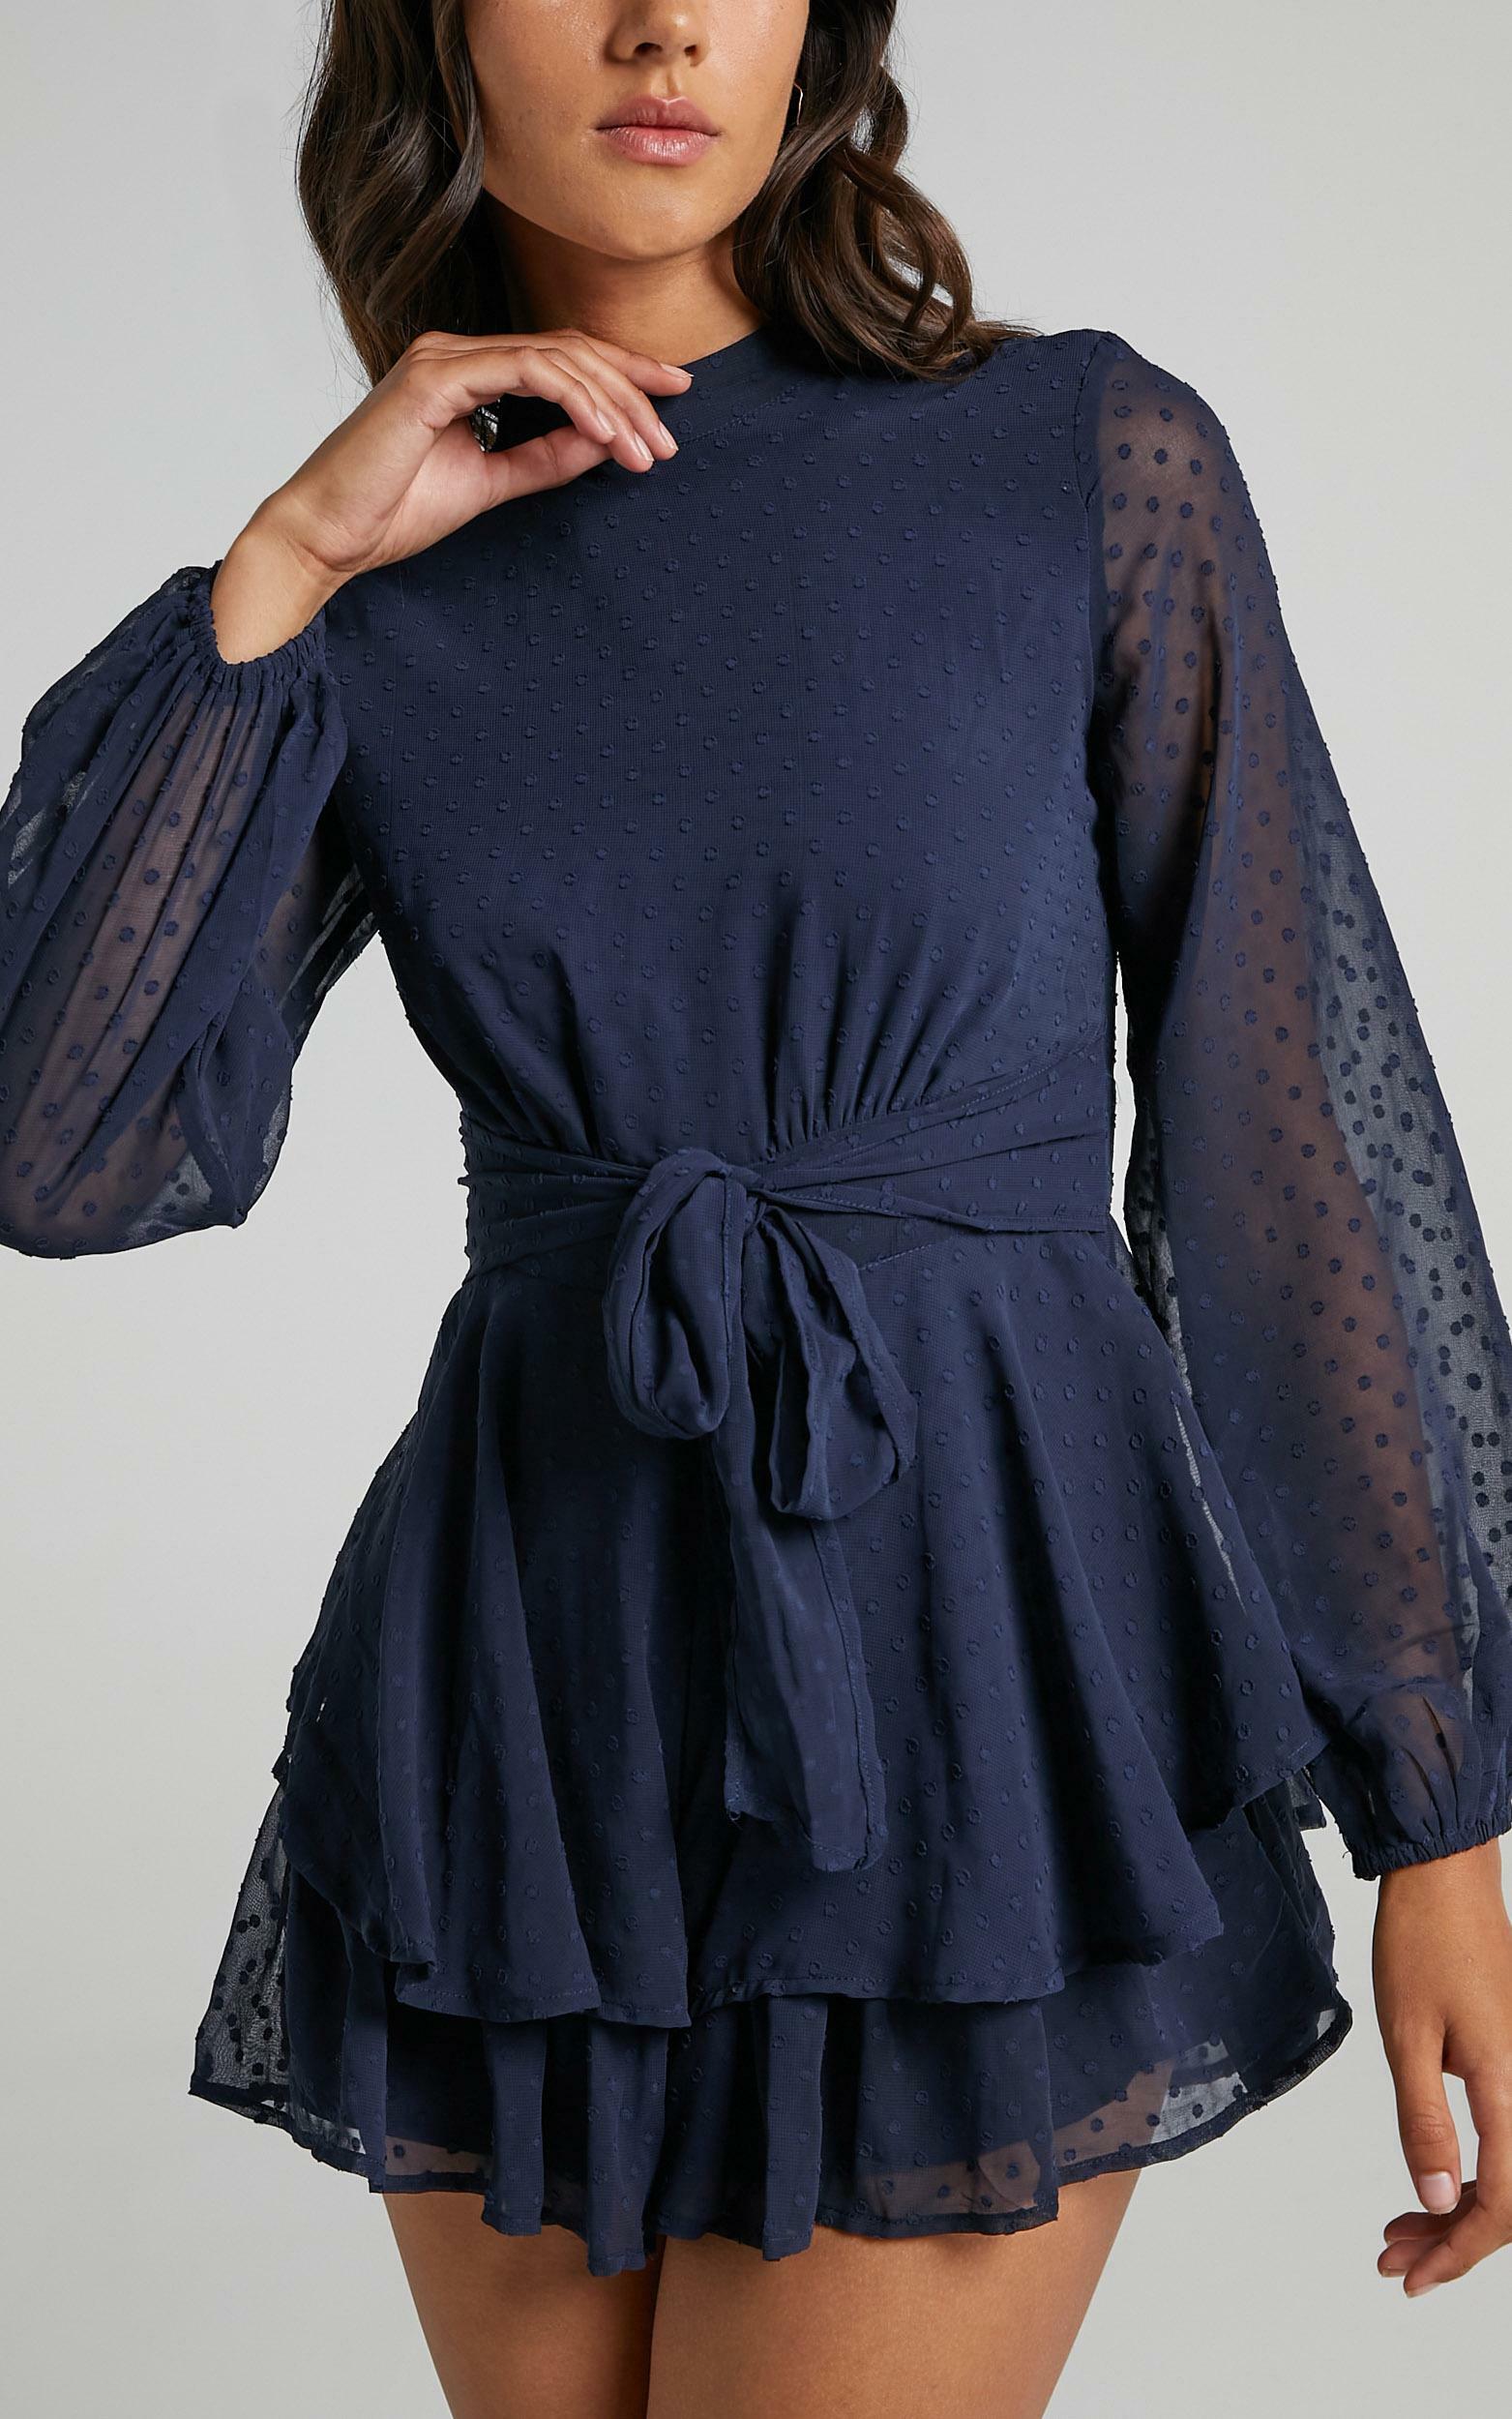 Bottom Of Your Heart Playsuit in Navy - 04, NVY5, hi-res image number null